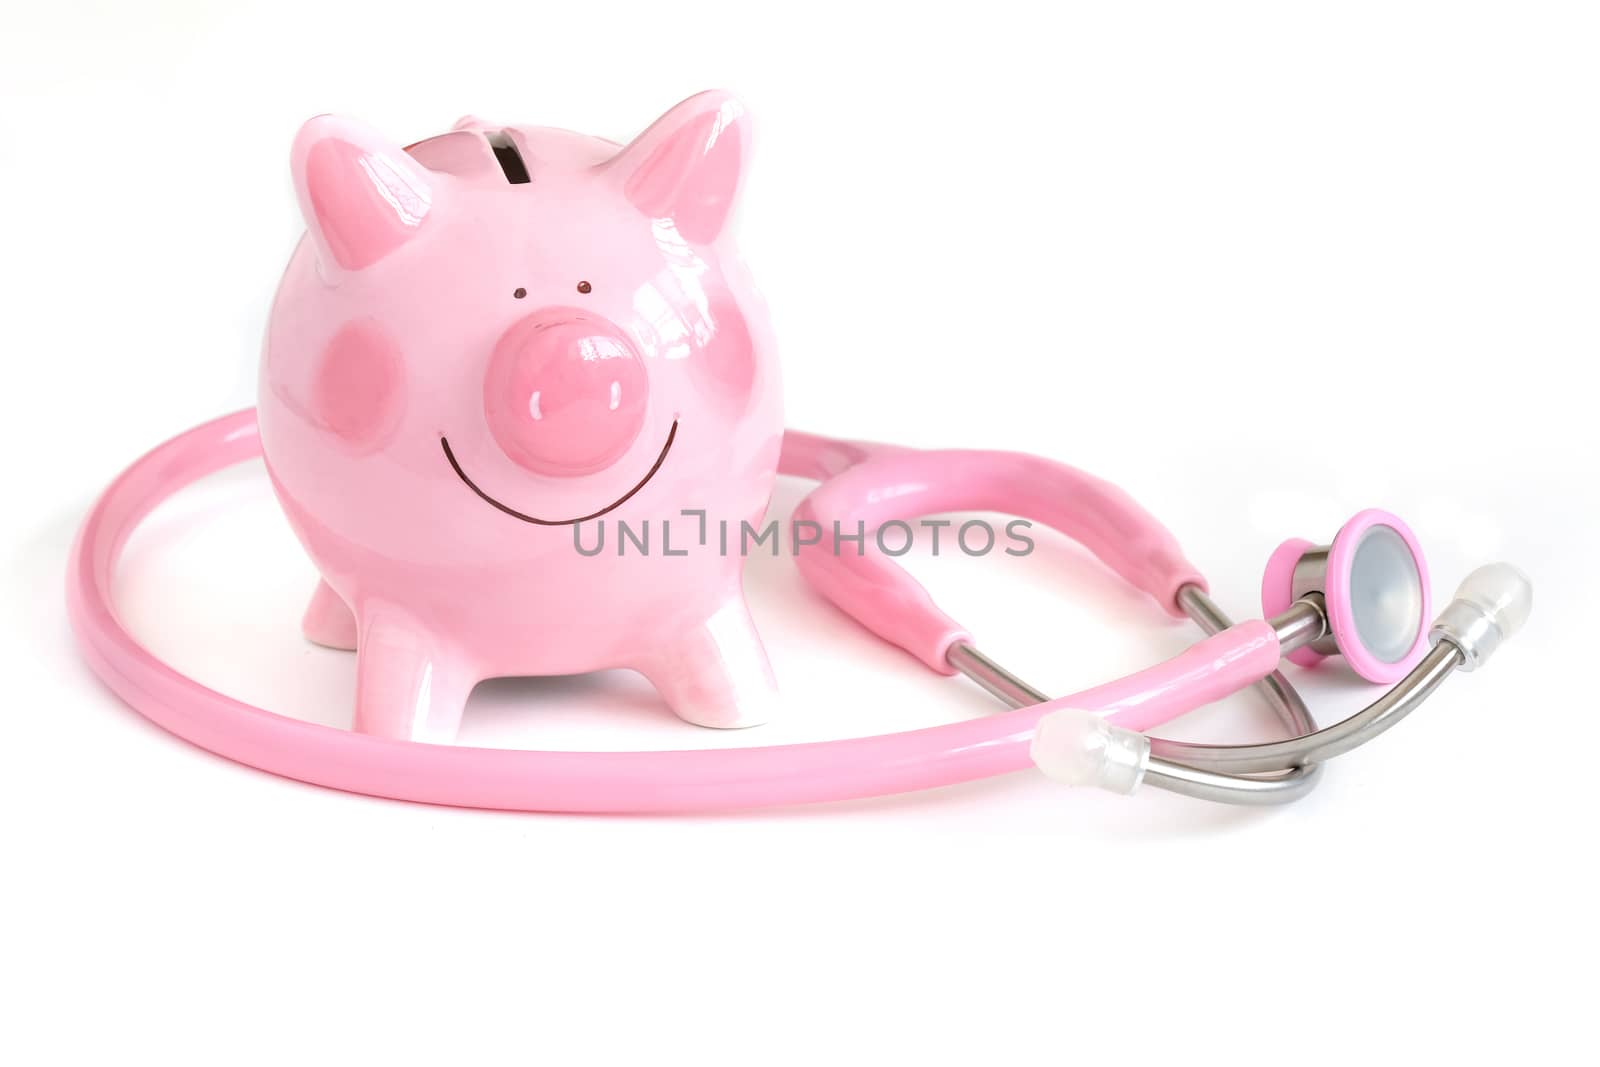 a cute pink ceramic piggy bank and a pink pediatric stehoscope. Isolated on white background. Insurance, Saving Health Care Cost.